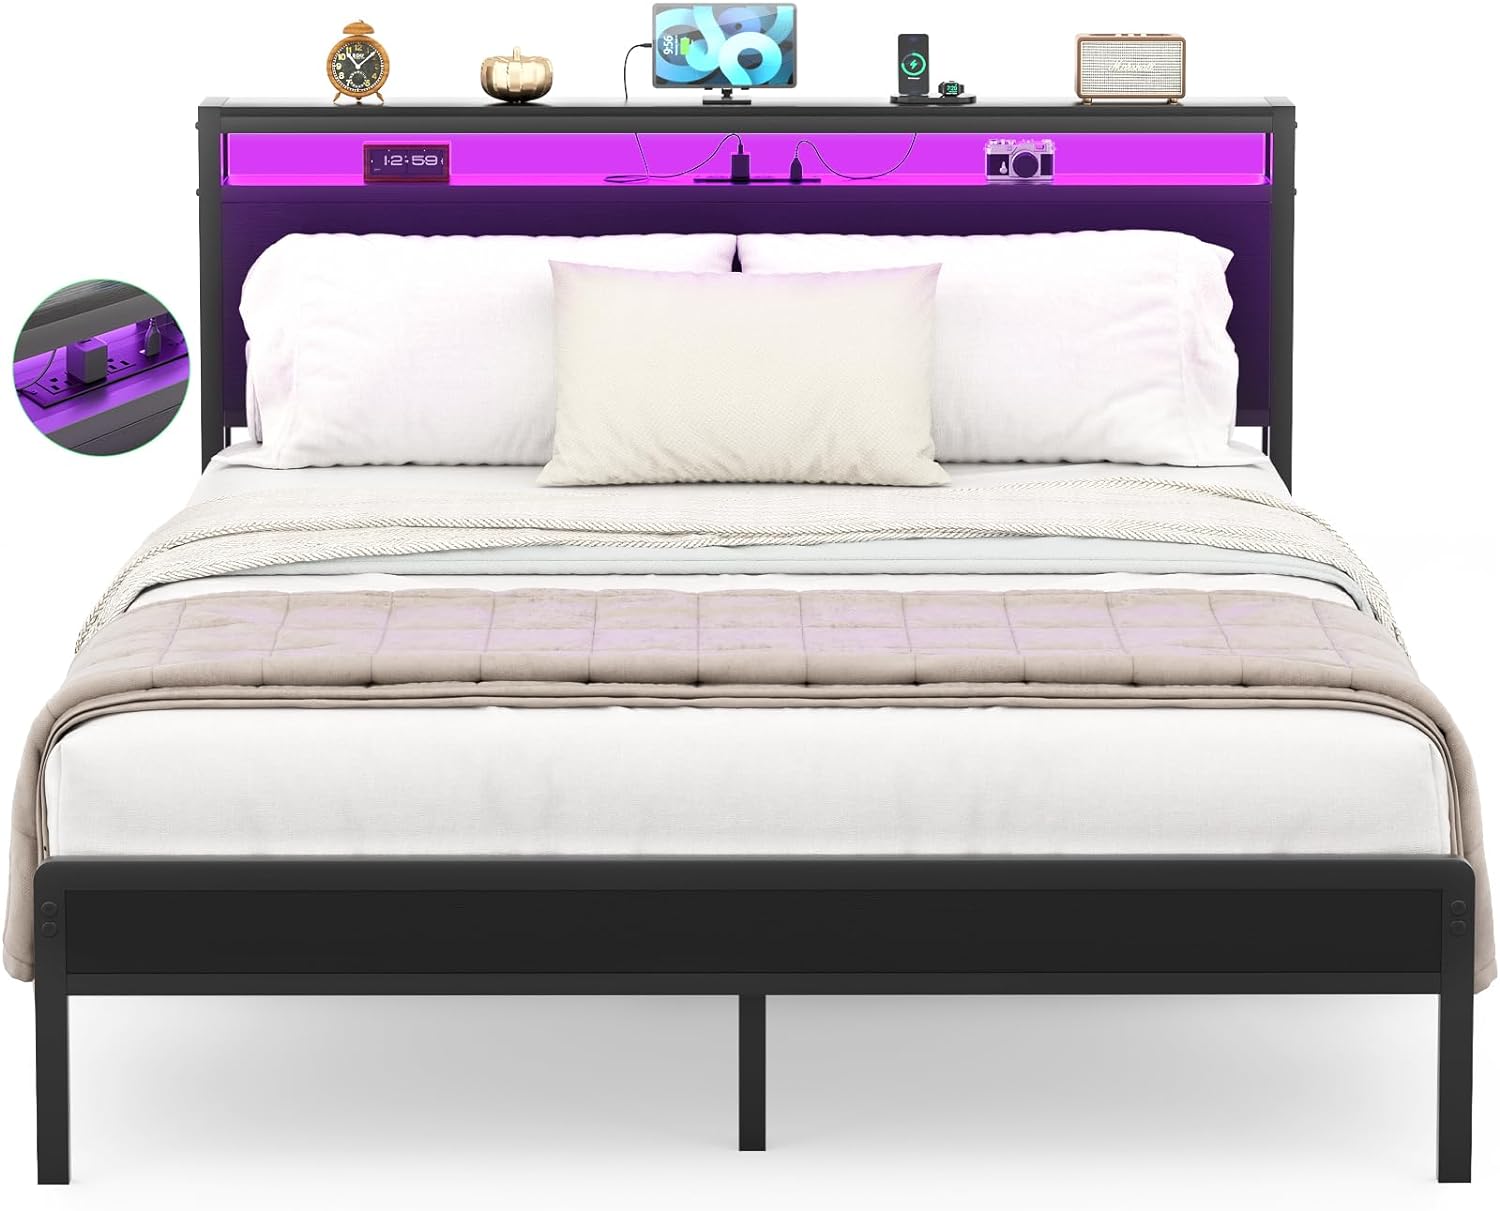 Homieasy Queen Size Bed Frame with Charging Station and Led Lights, Industrial Metal Platform Bed with Storage Headboard, Steel Slat Support, No Box Spring Needed, Noise-Free, Easy Assembly, Black